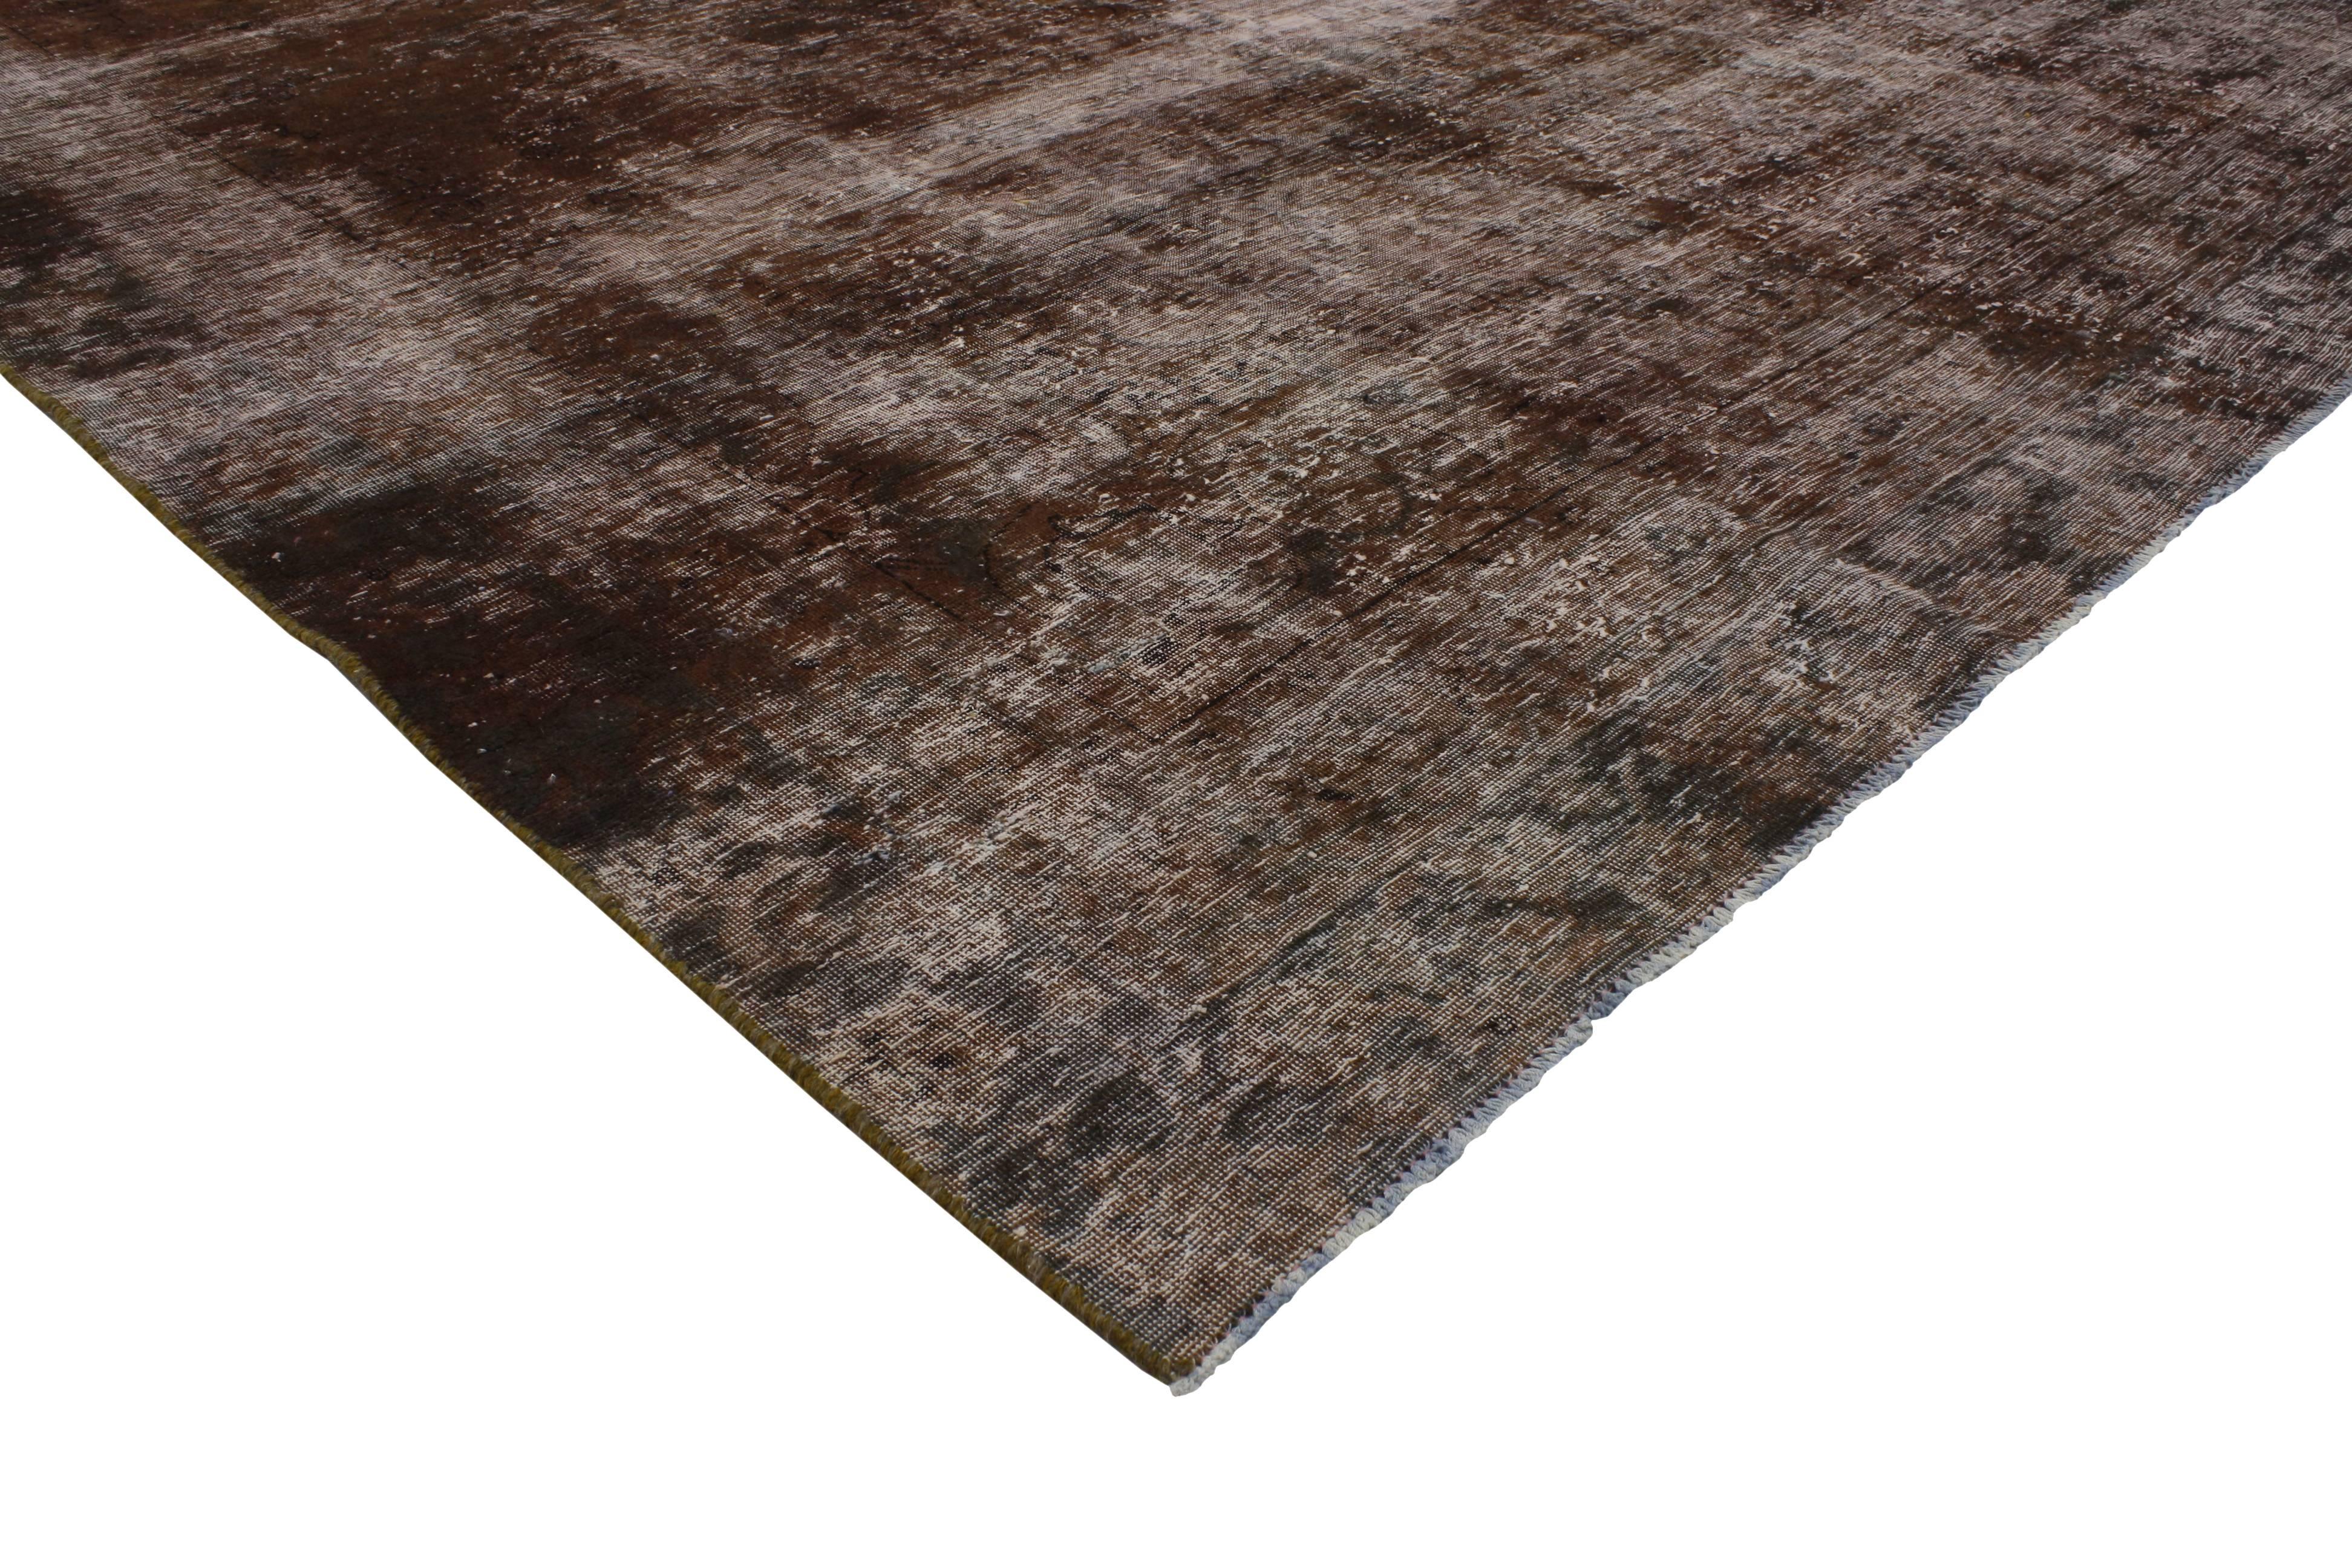 76826 Distressed Antique Persian Tabriz Rug with Modern Industrial Style. Discover the power of modern Industrial style and employ a less-is-more tactic in decorating with this distressed antique Tabriz Persian rug. From the distressed composition